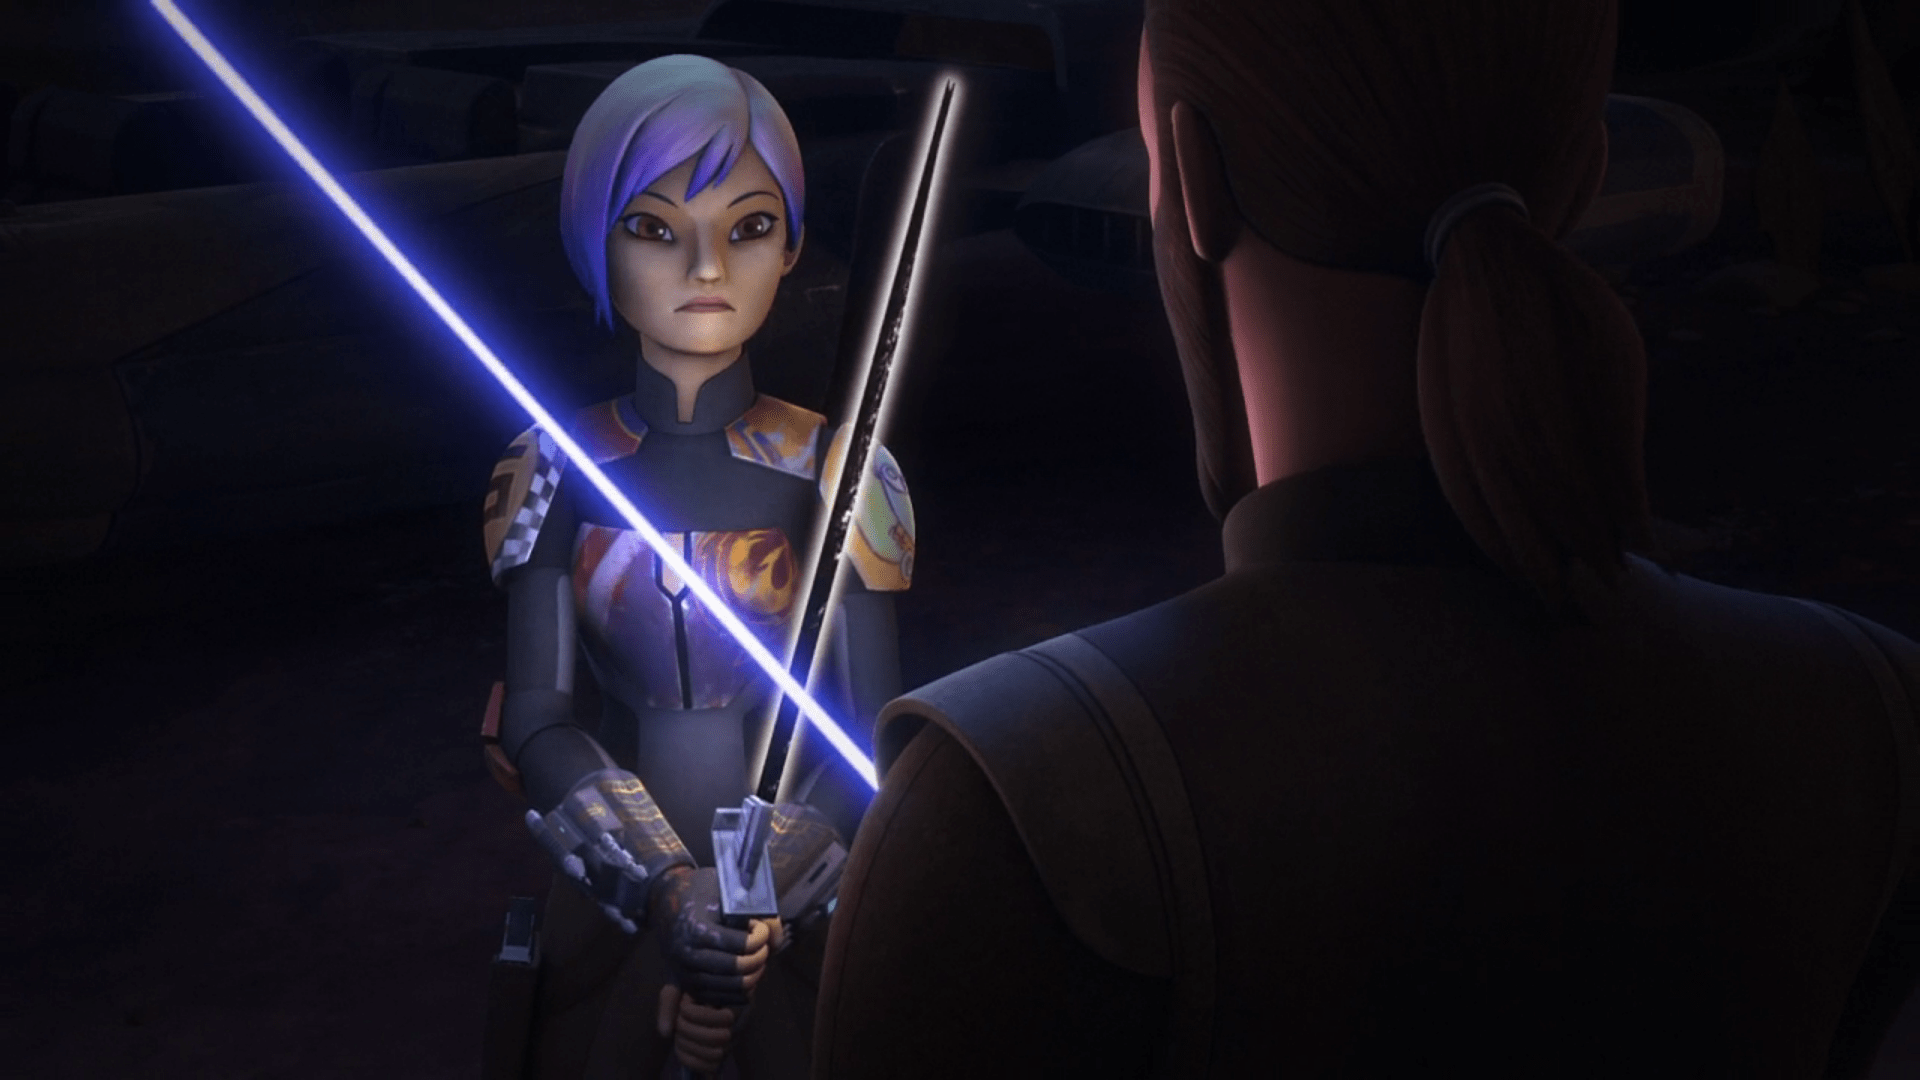 Star Wars Rebels Review: “Trials of the Darksaber”